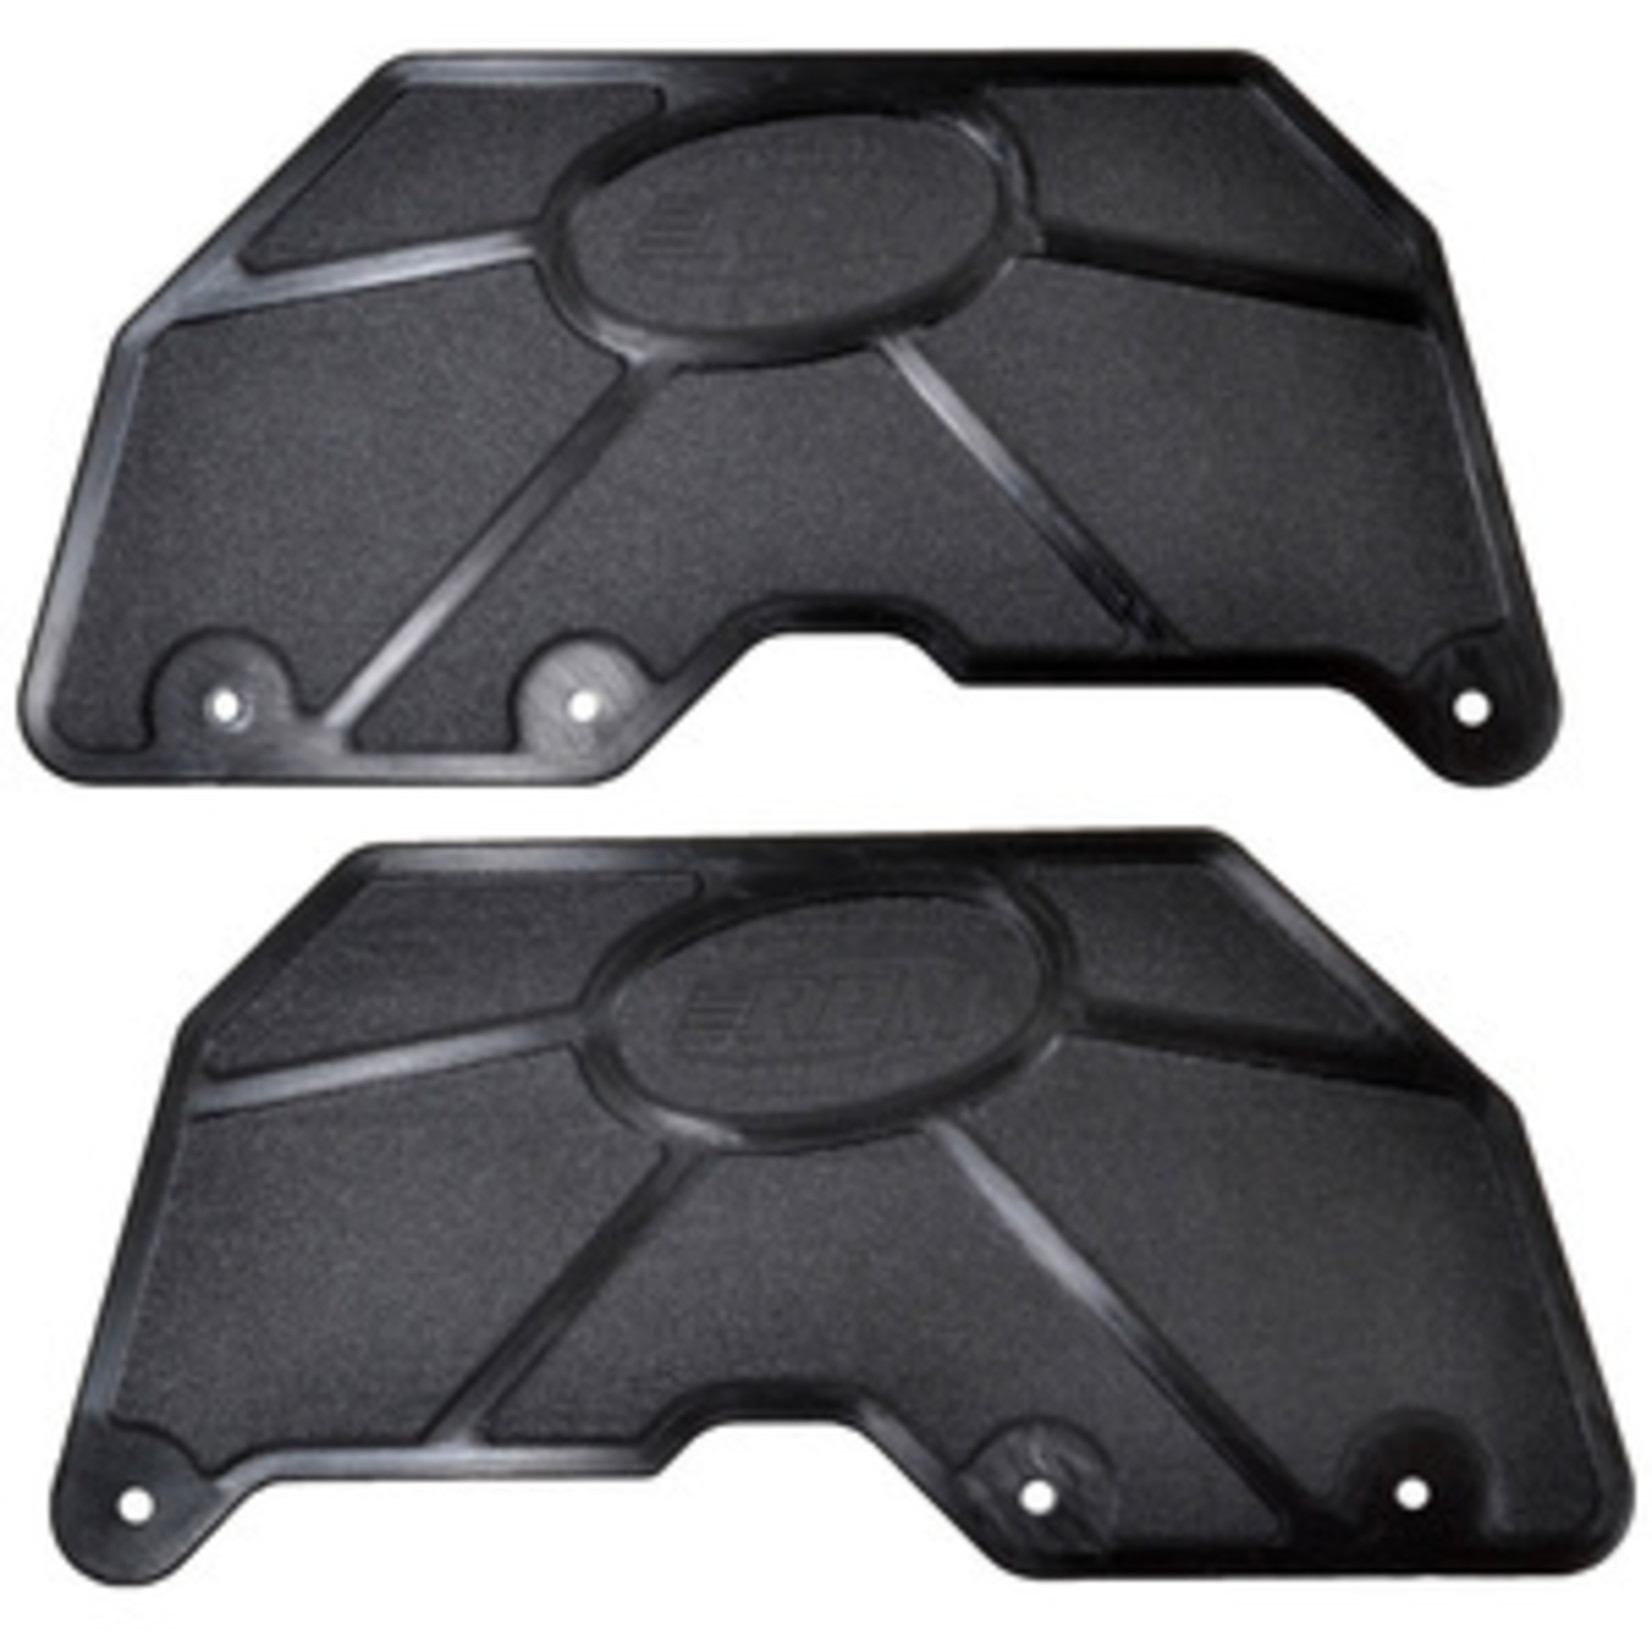 RPM R/C Products RPM80642  Mud Guards for RPM Kraton 8S A-Arms (80812)